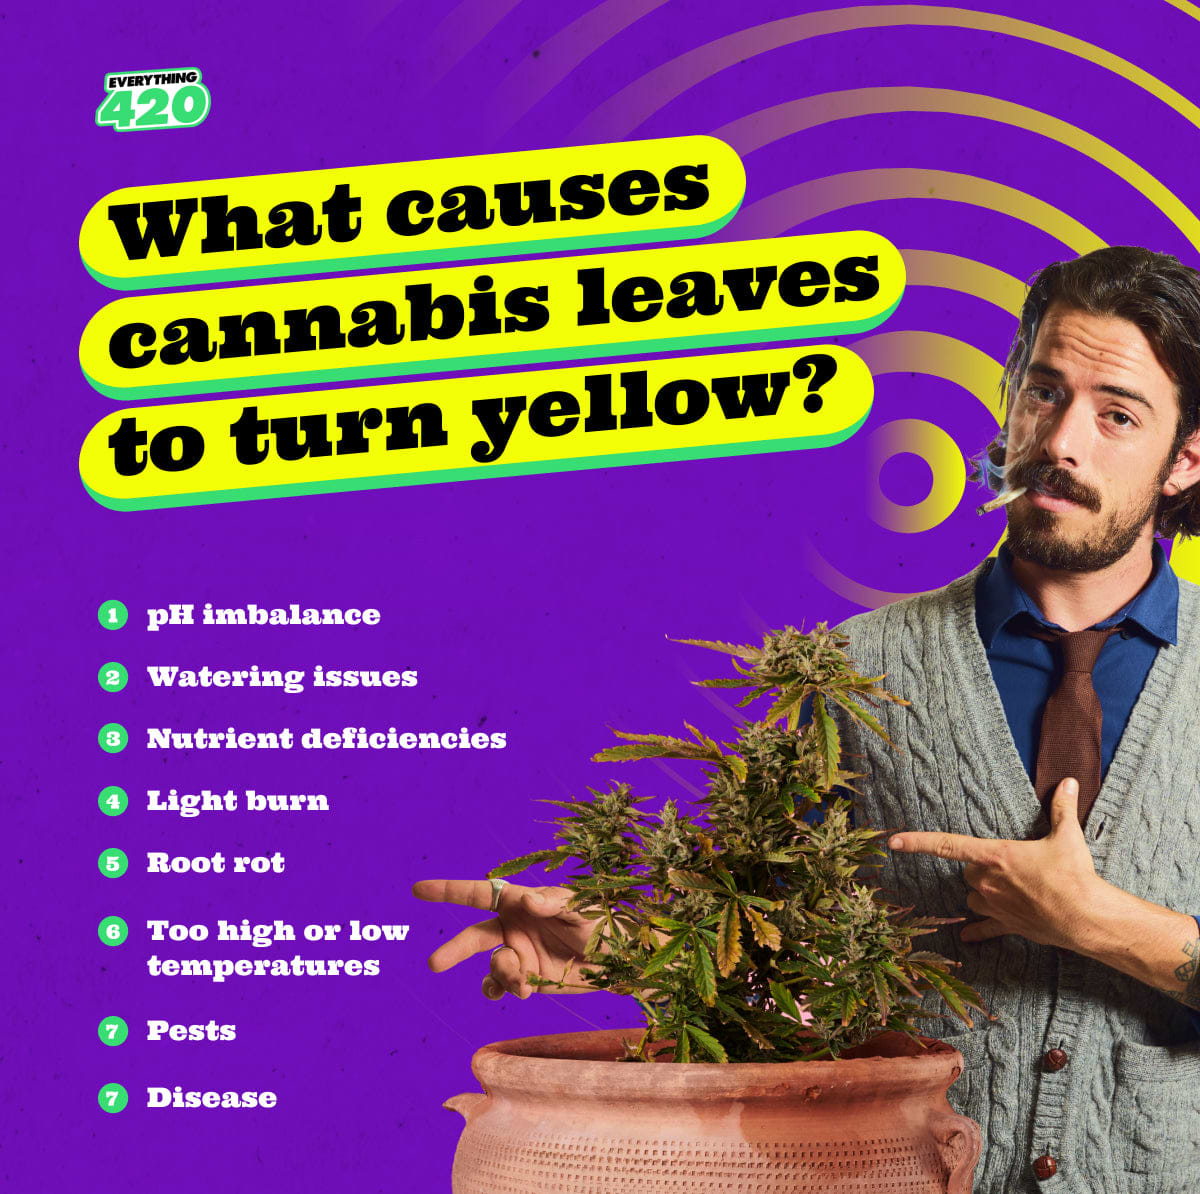 What causes cannabis leaves to turn yellow?